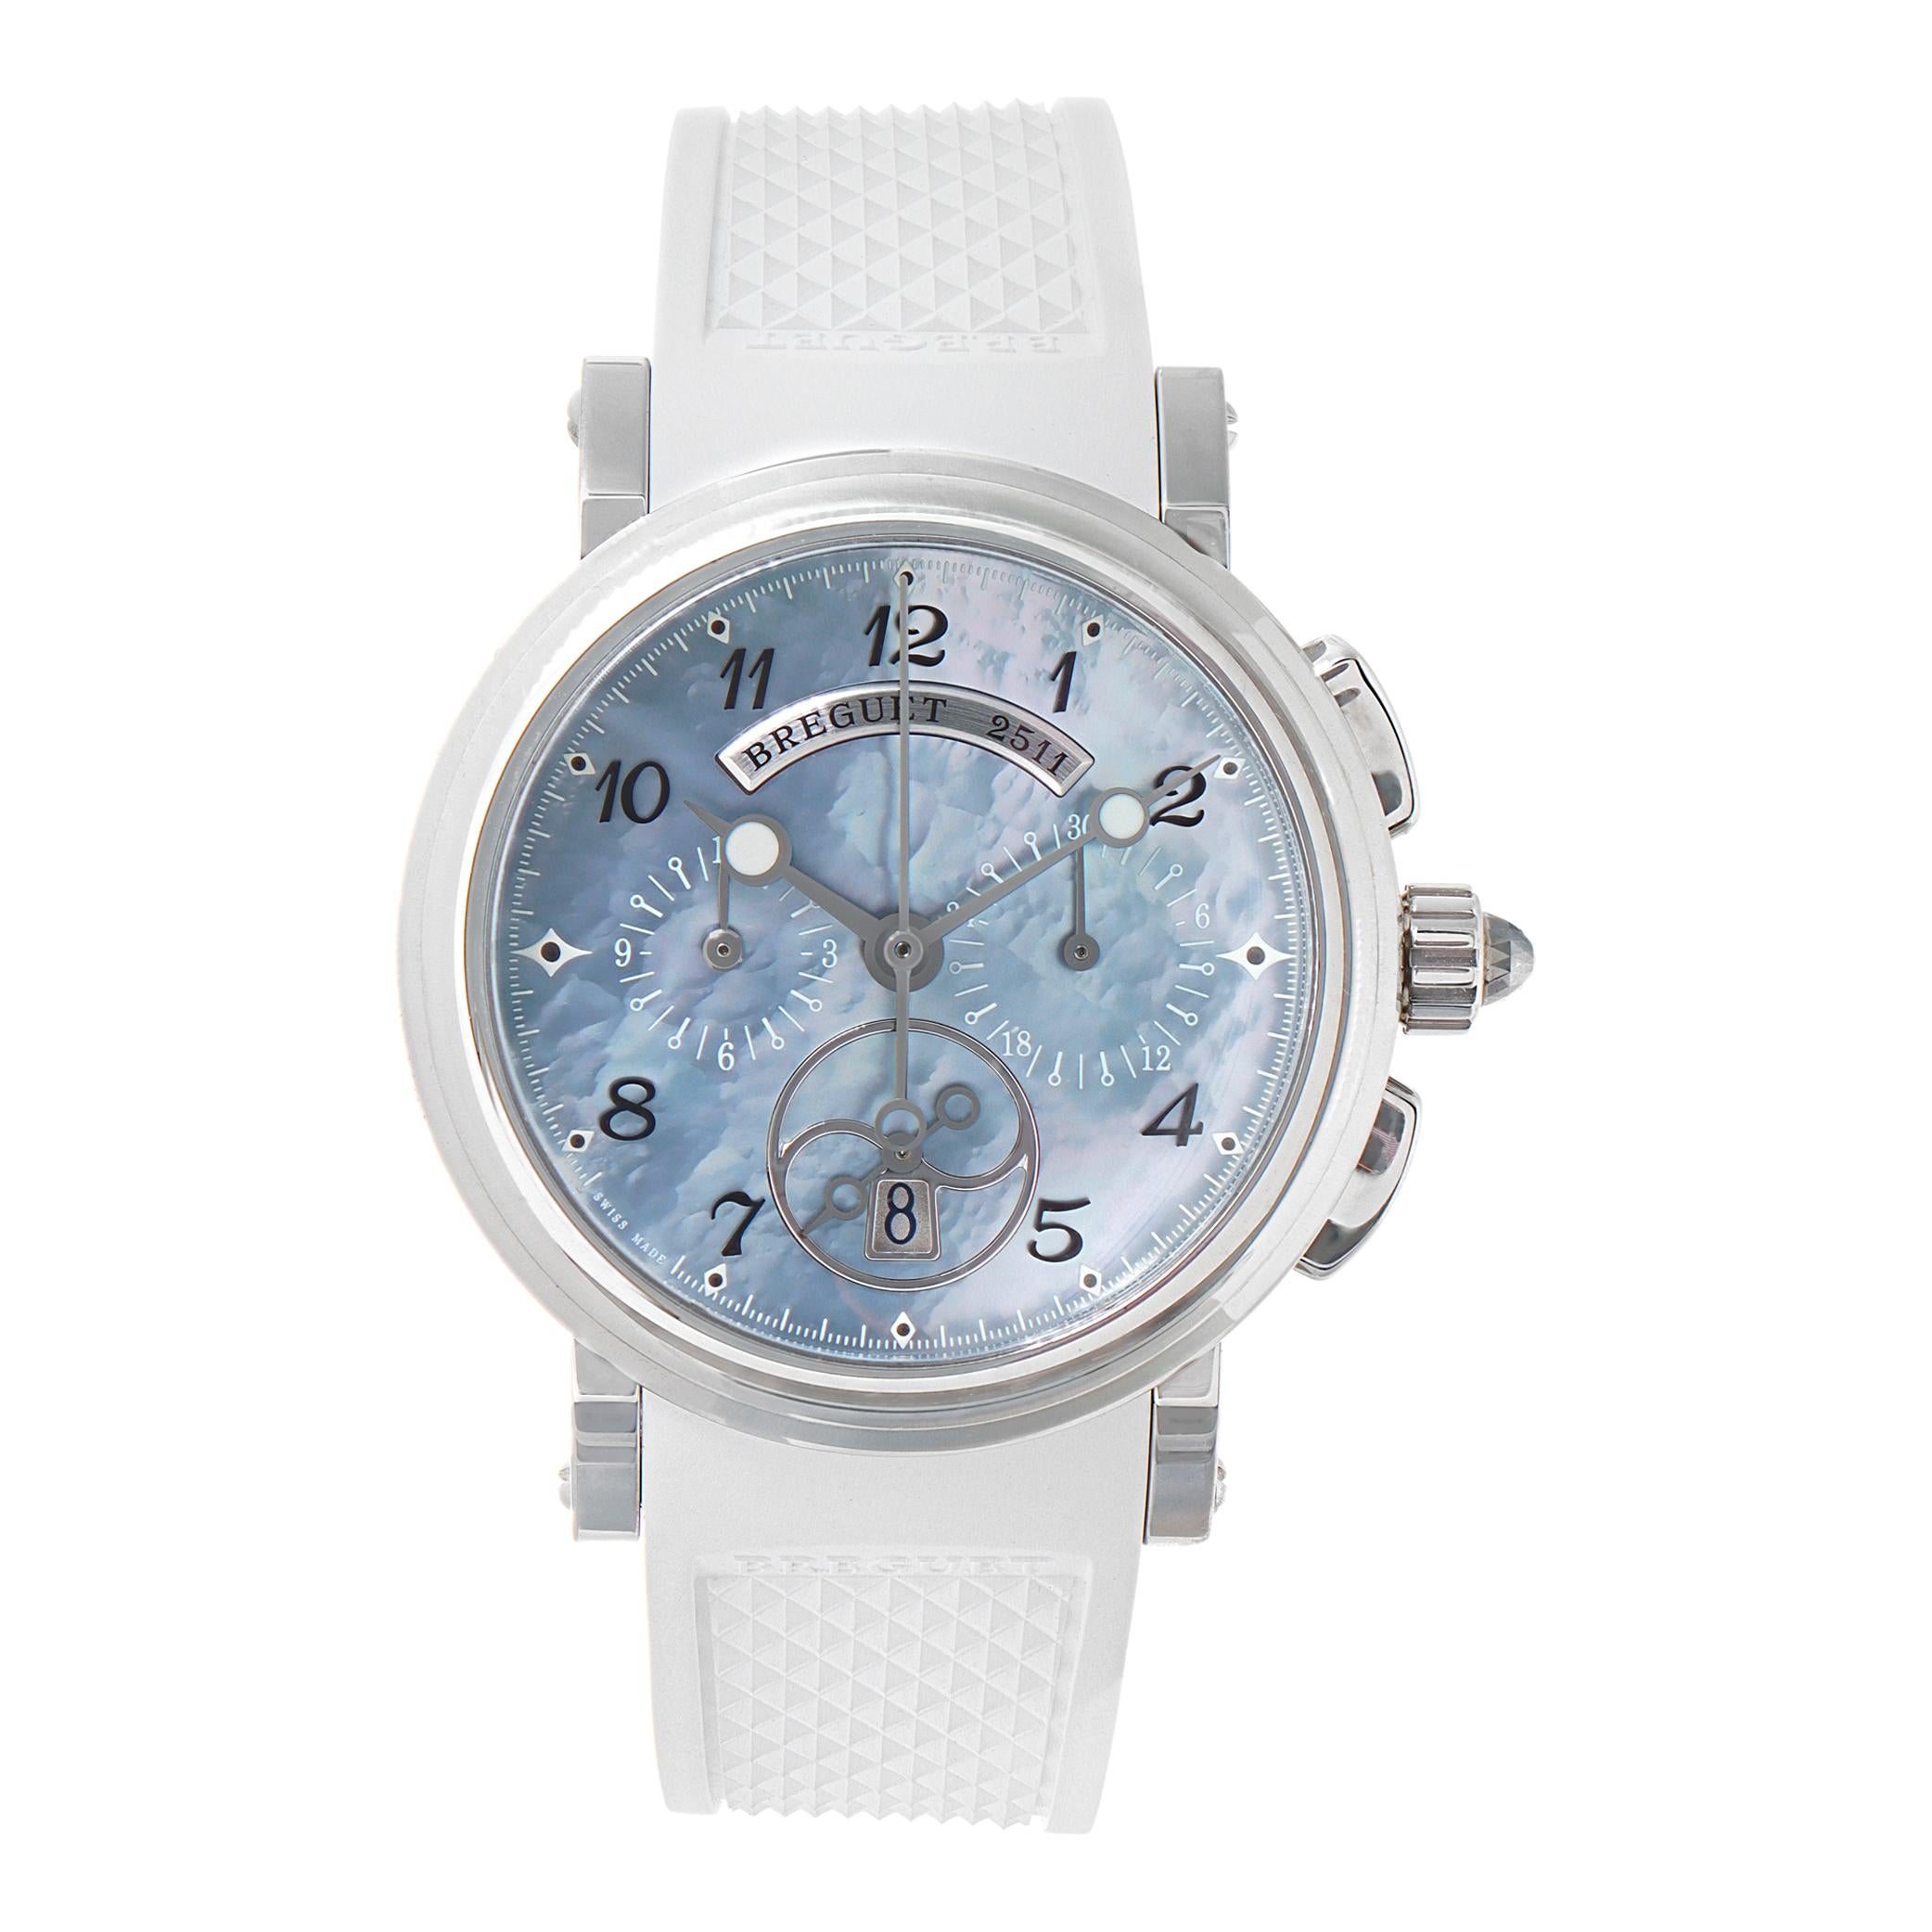 Breguet Marine stainless steel Automatic Wristwatch Ref 8827 For Sale